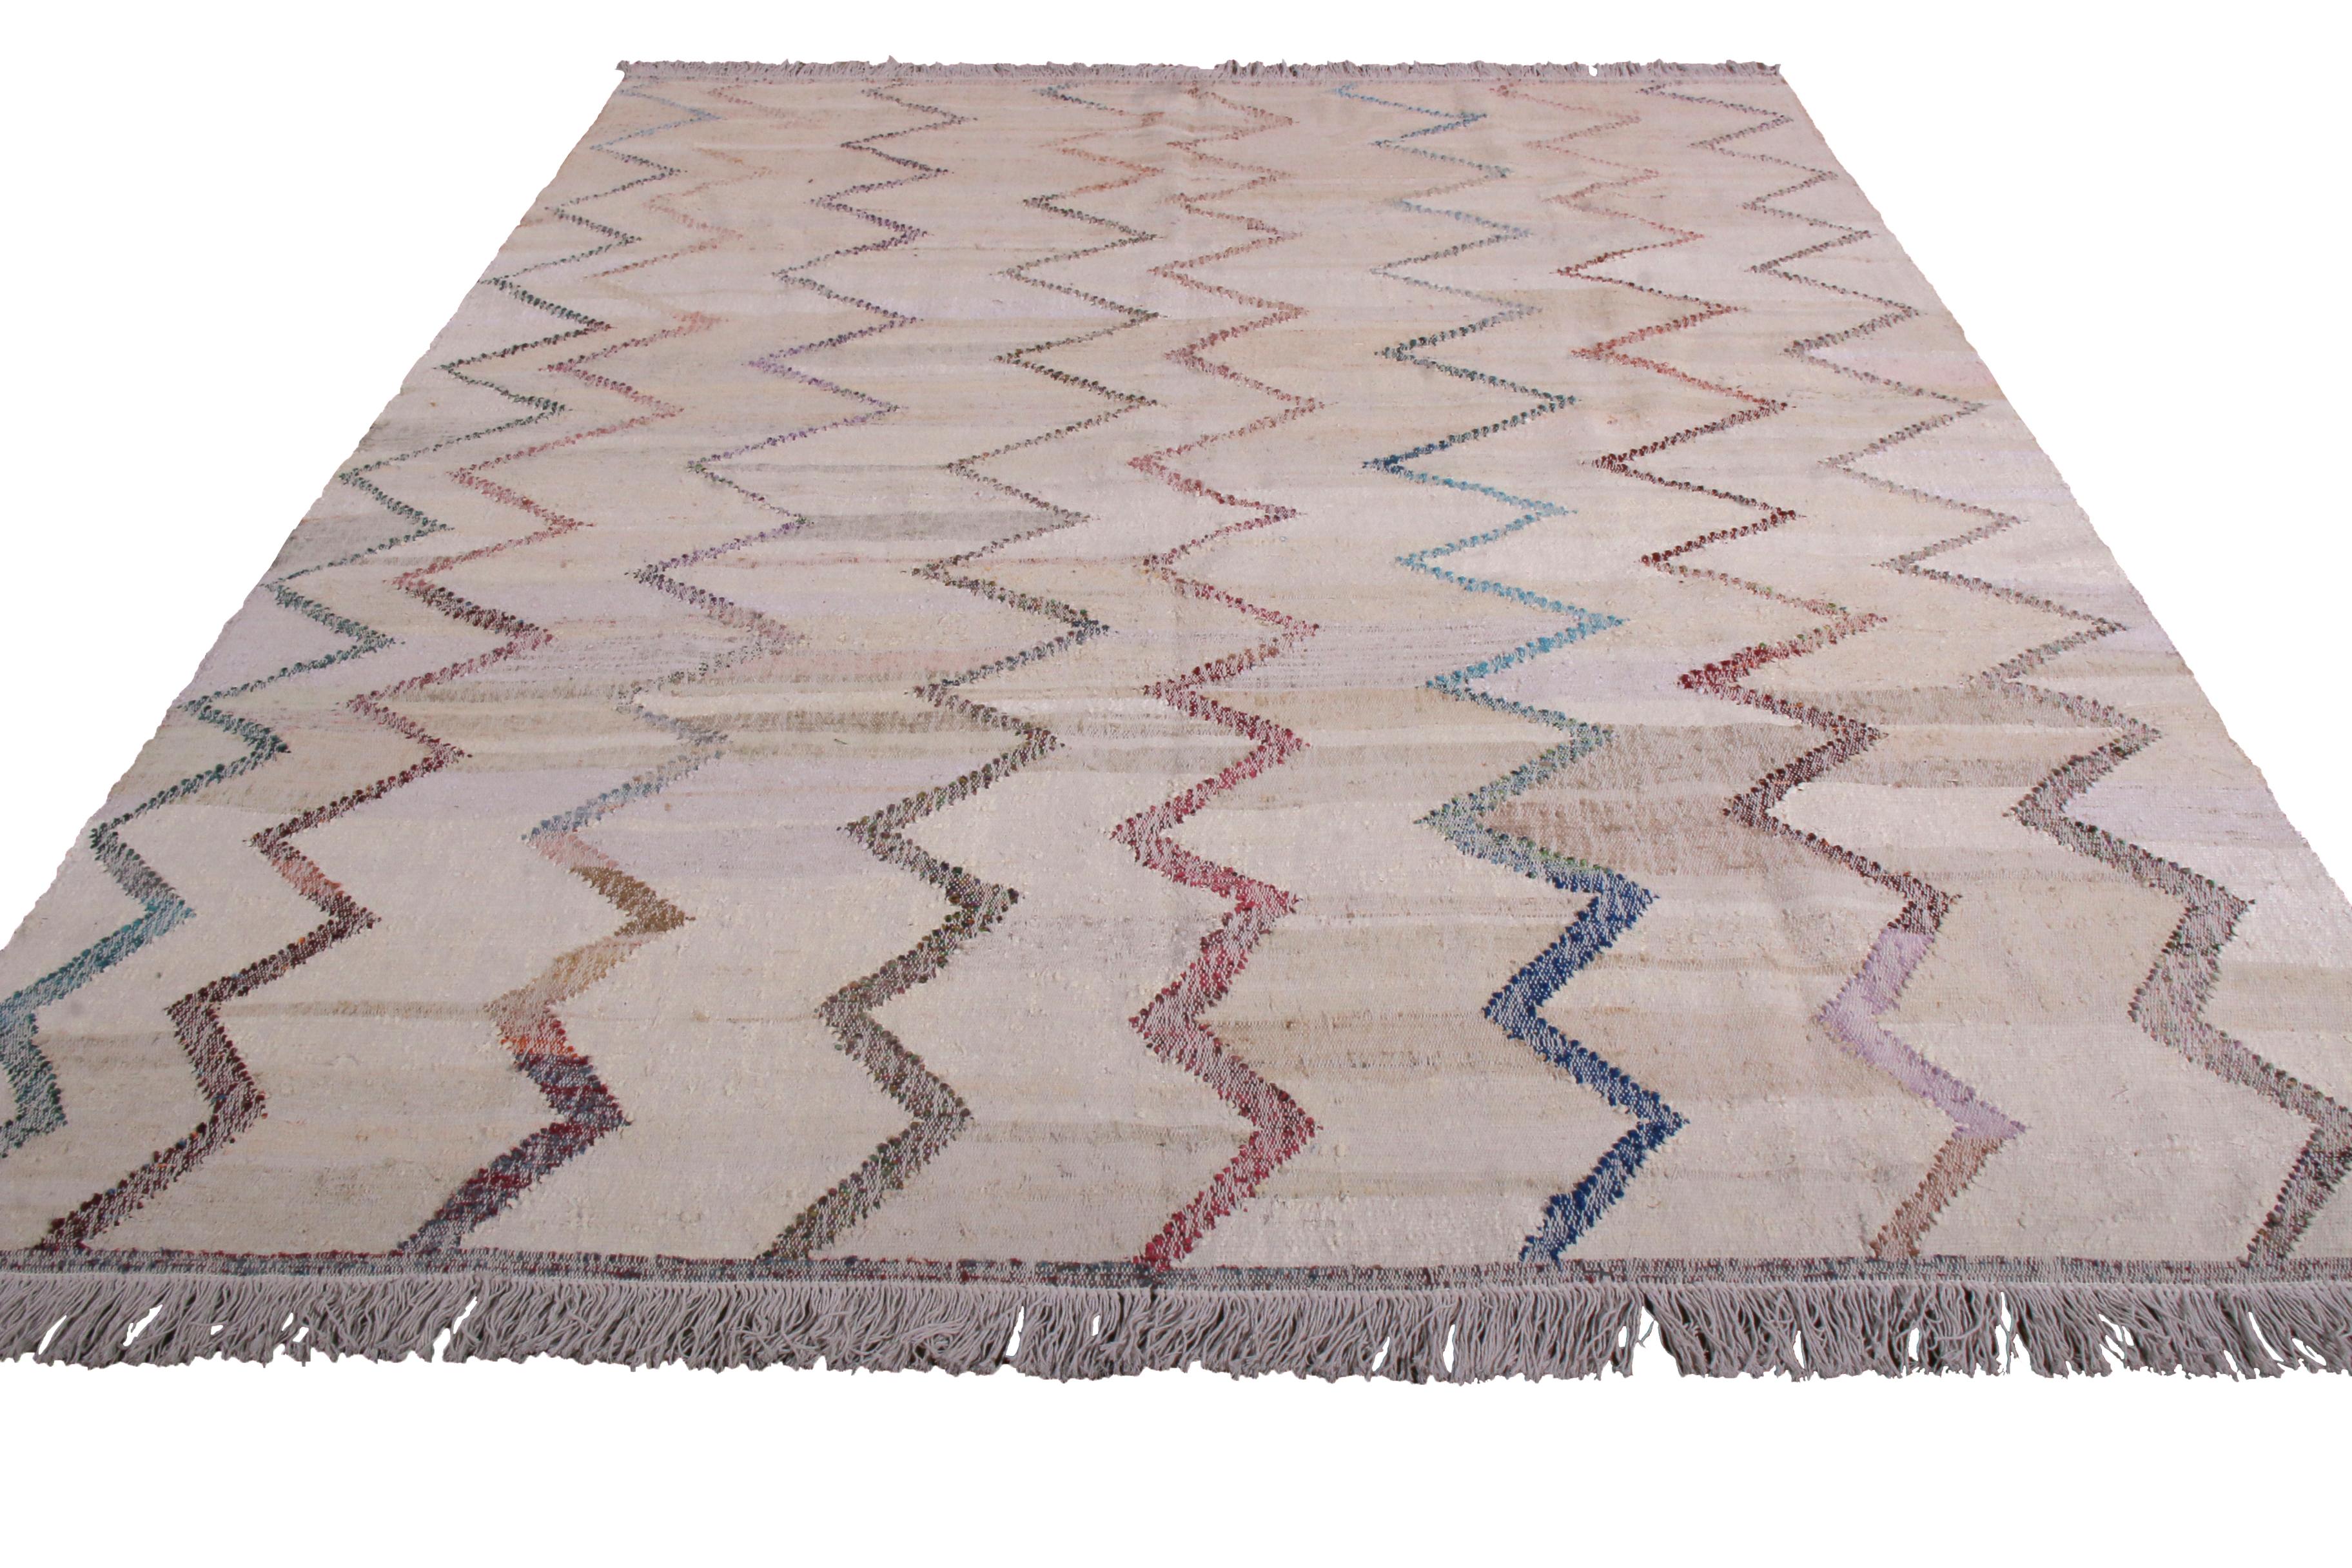 This contemporary Kilim represents a selection of distinct new patterns joining Rug & Kilim’s New and Modern collection, uniquely handwoven from the yarns of Classic textiles and Kilims to create this transitional flat-weave and its lively, varied